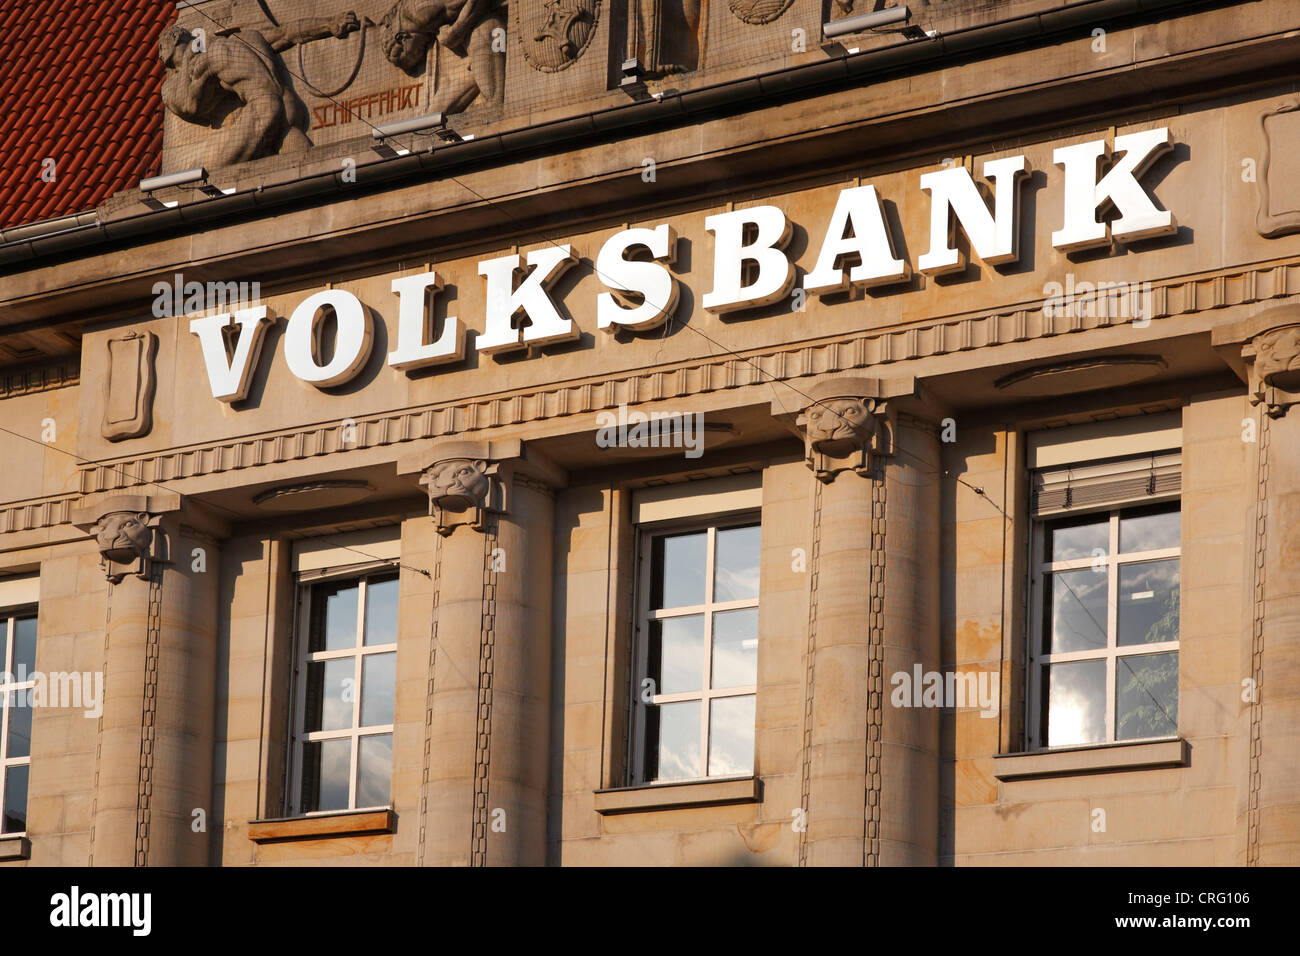 Volksbank - a Bank in Germany Stock Photo